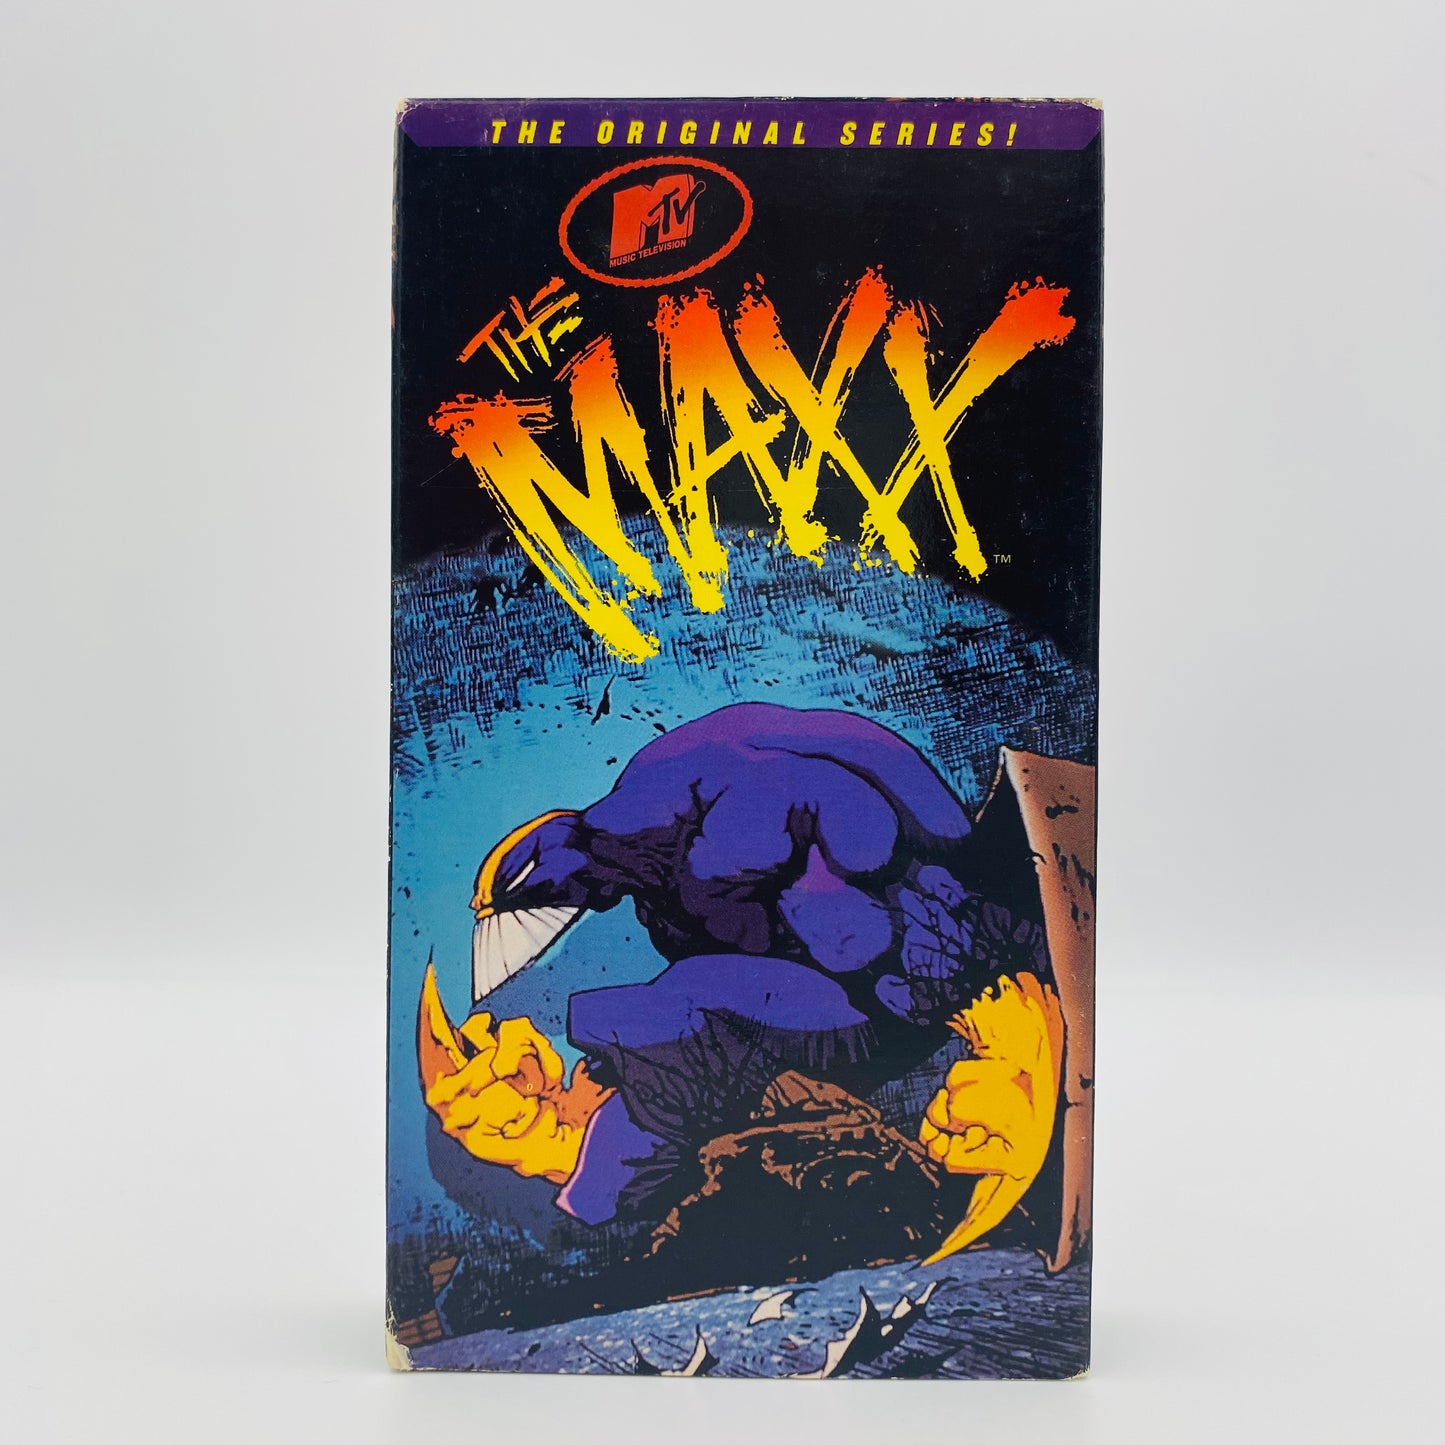 The Maxx VHS tape (1996) Sony Music Entertainment